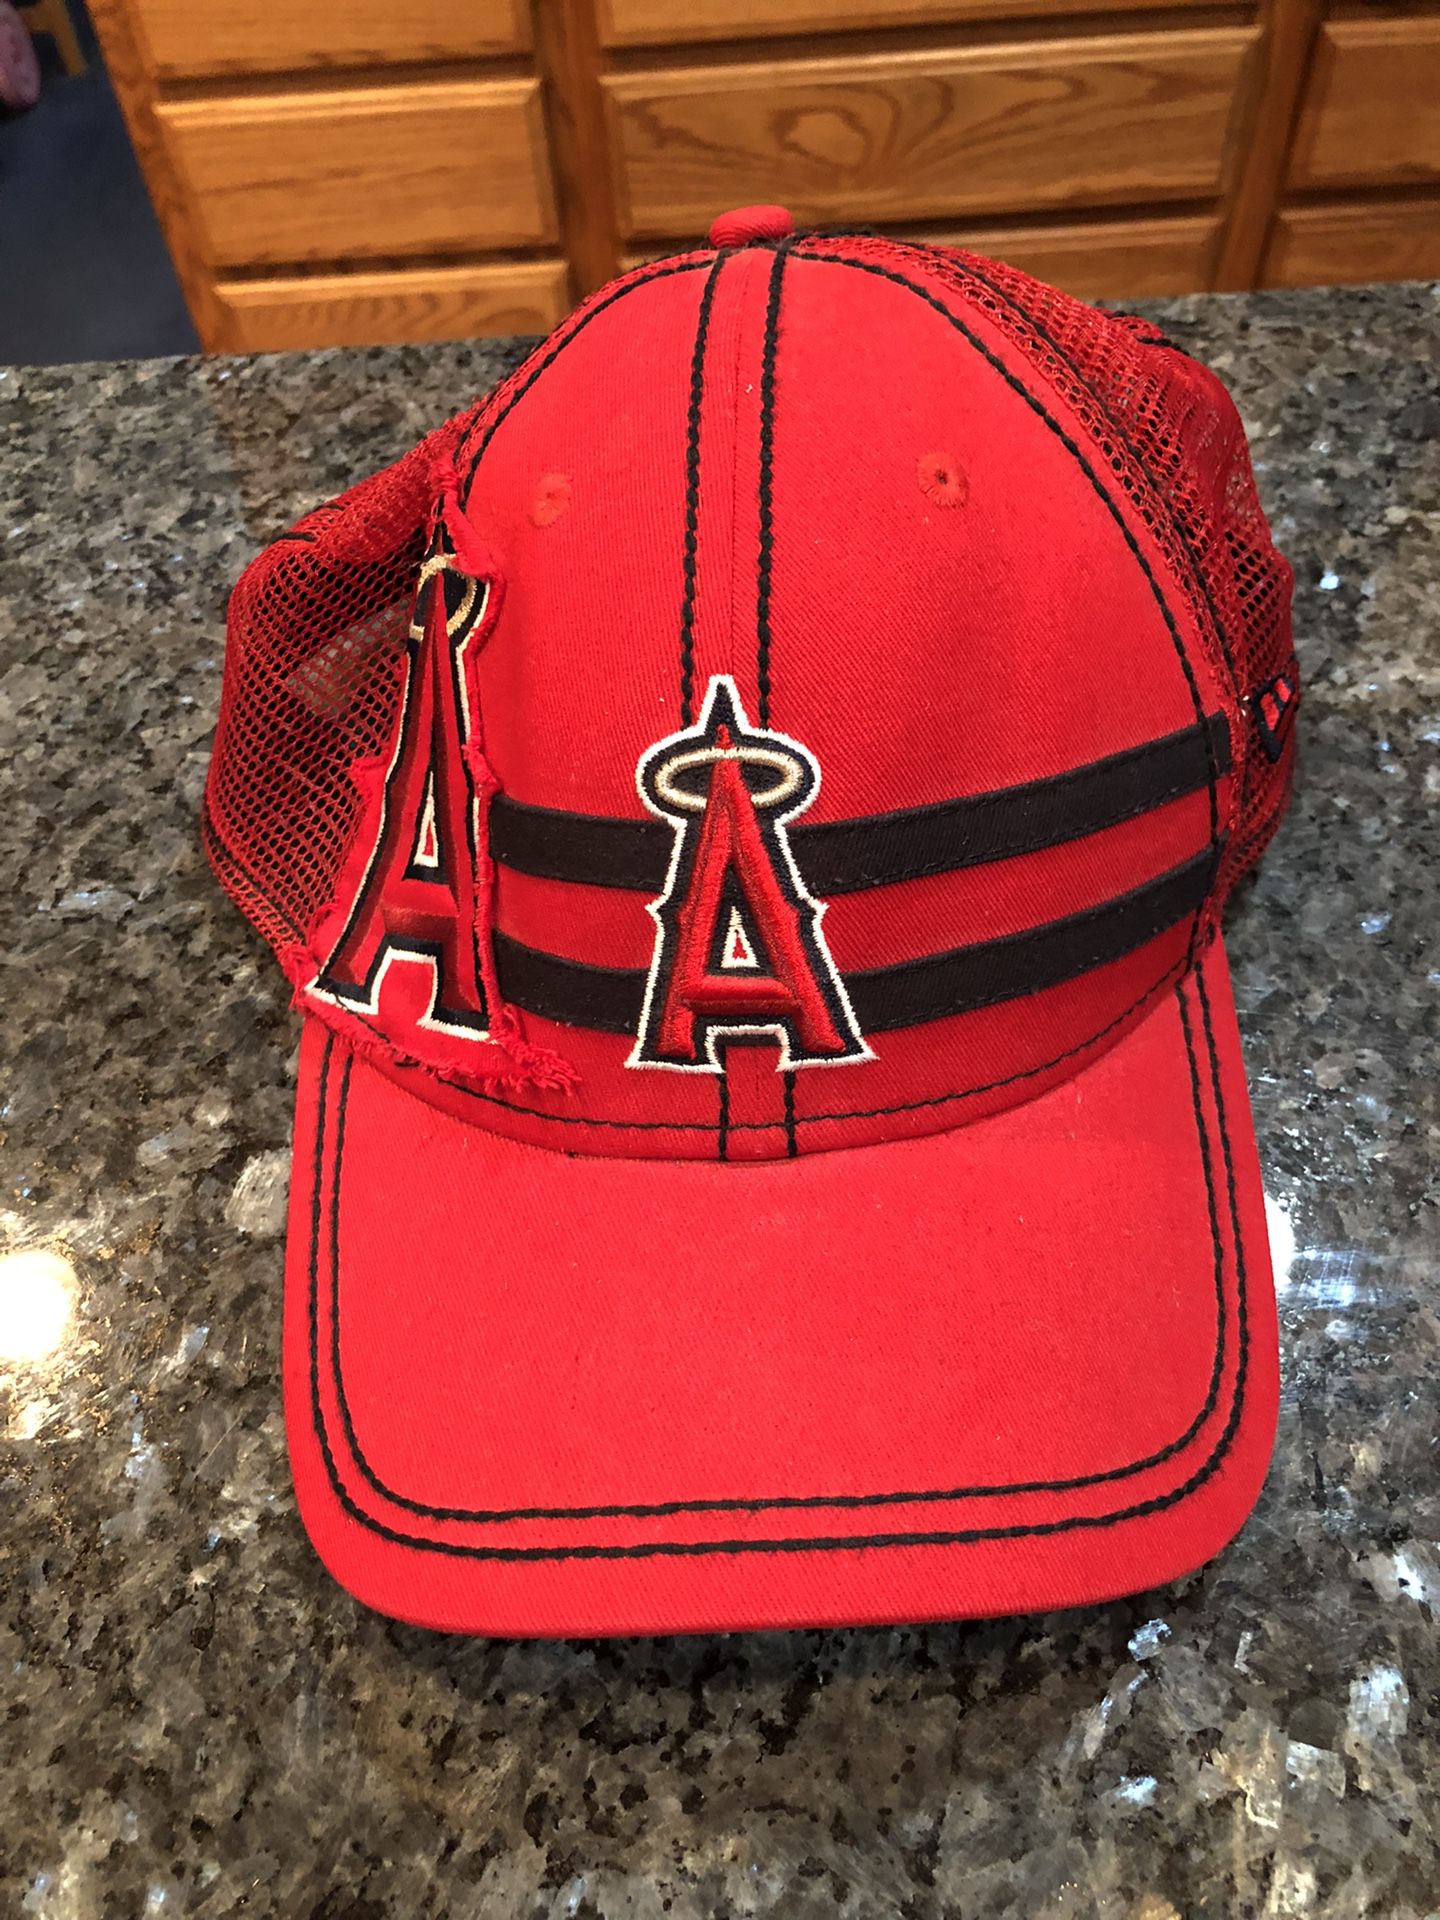 Los Angeles Angels Of Anaheim Baseball Hat With Halo Emblems. Mesh